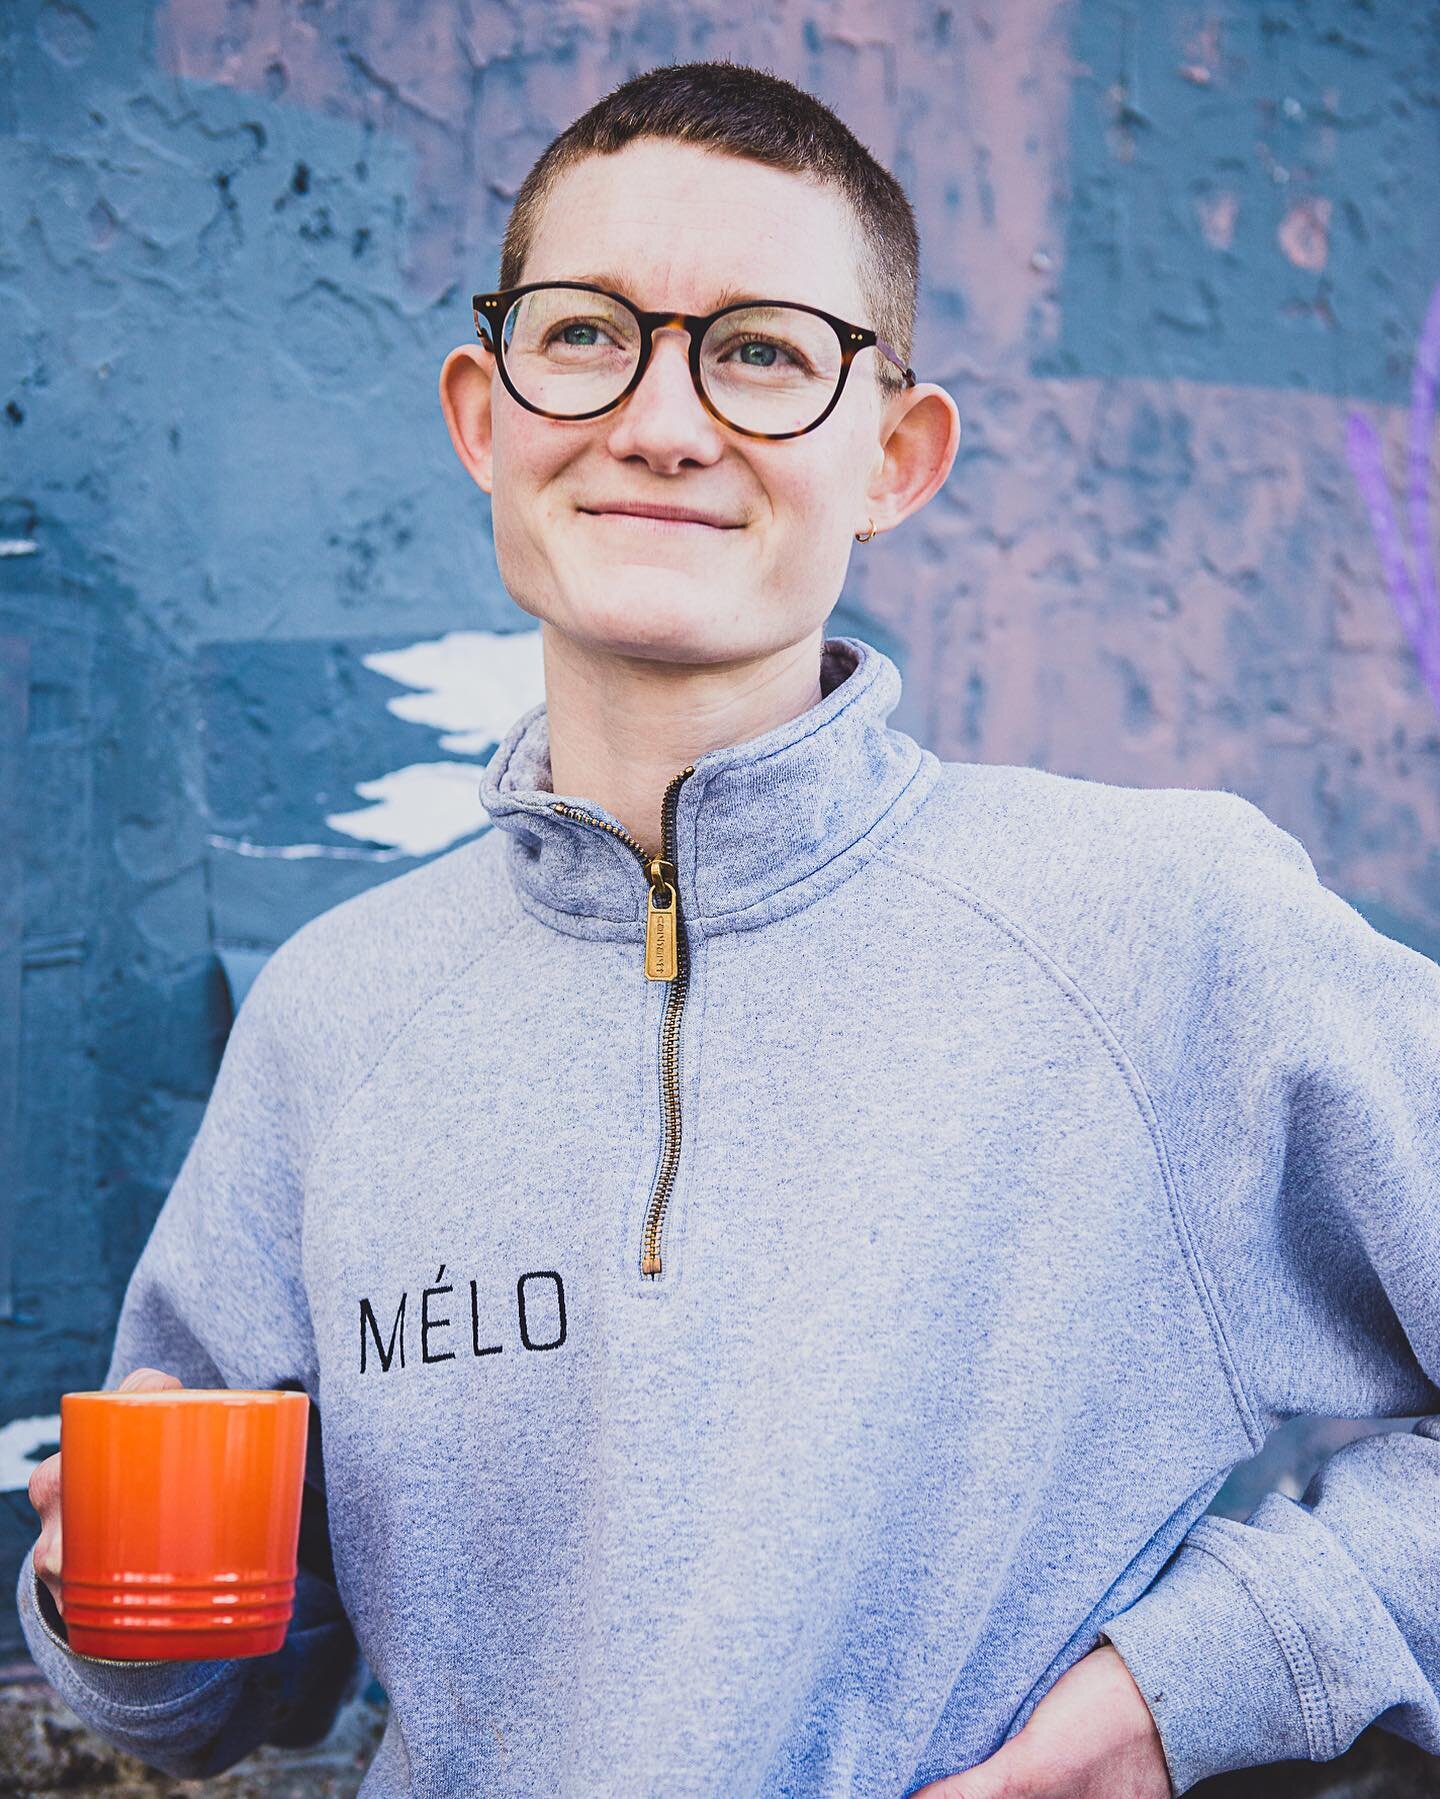 I&rsquo;ve been meaning to photograph this wonderful face for a while. If you&rsquo;re ever wanting an amazing coffee served with a large dollop of good energy then @cafemelohackney, Dalston is the place for you! #photography #fridaysface #photograph